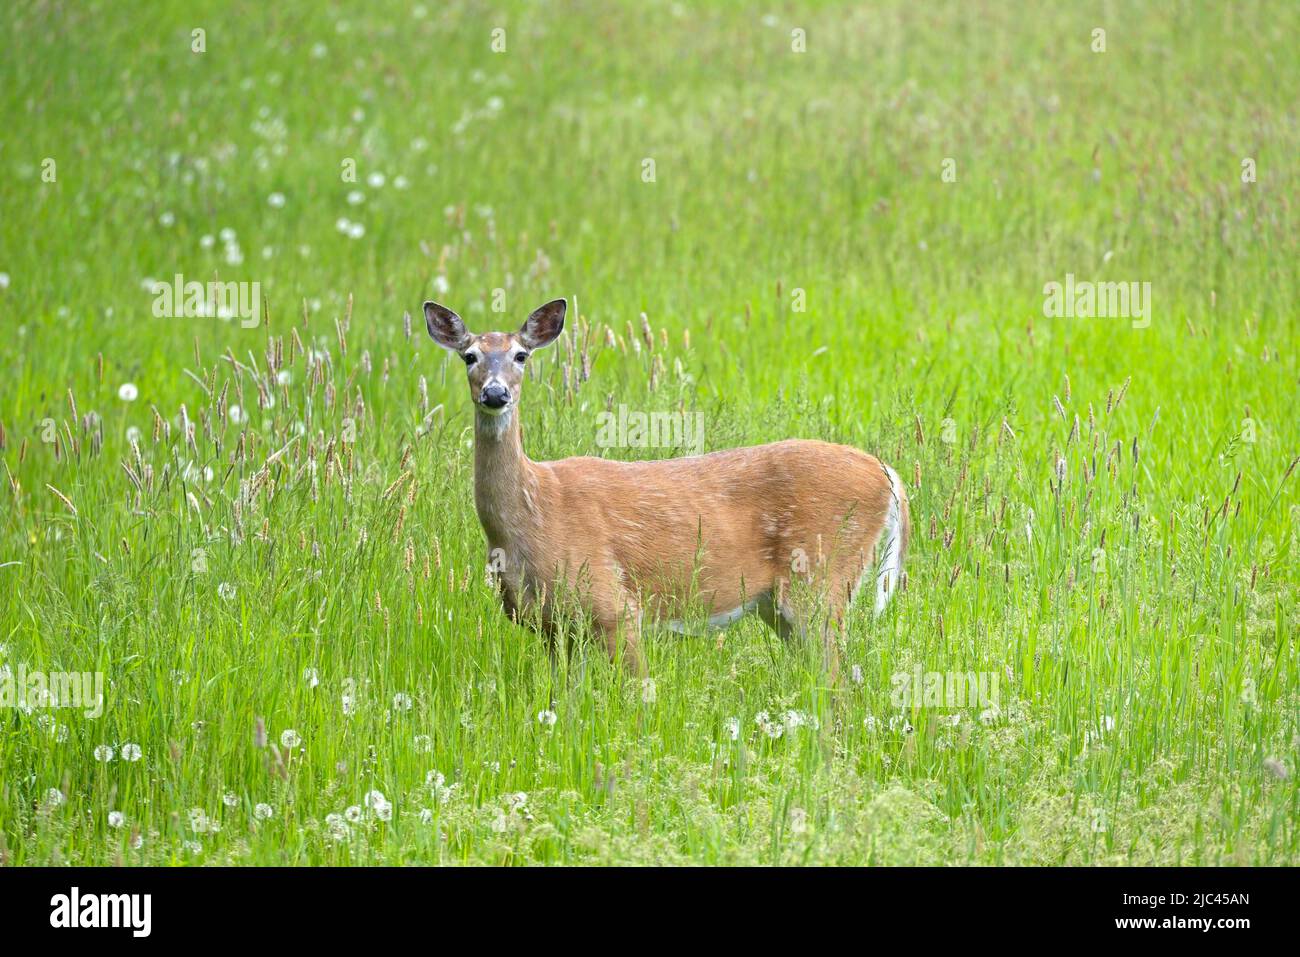 A white tail deer stands in a grassy field chewing on grass in eastern Washington. Stock Photo